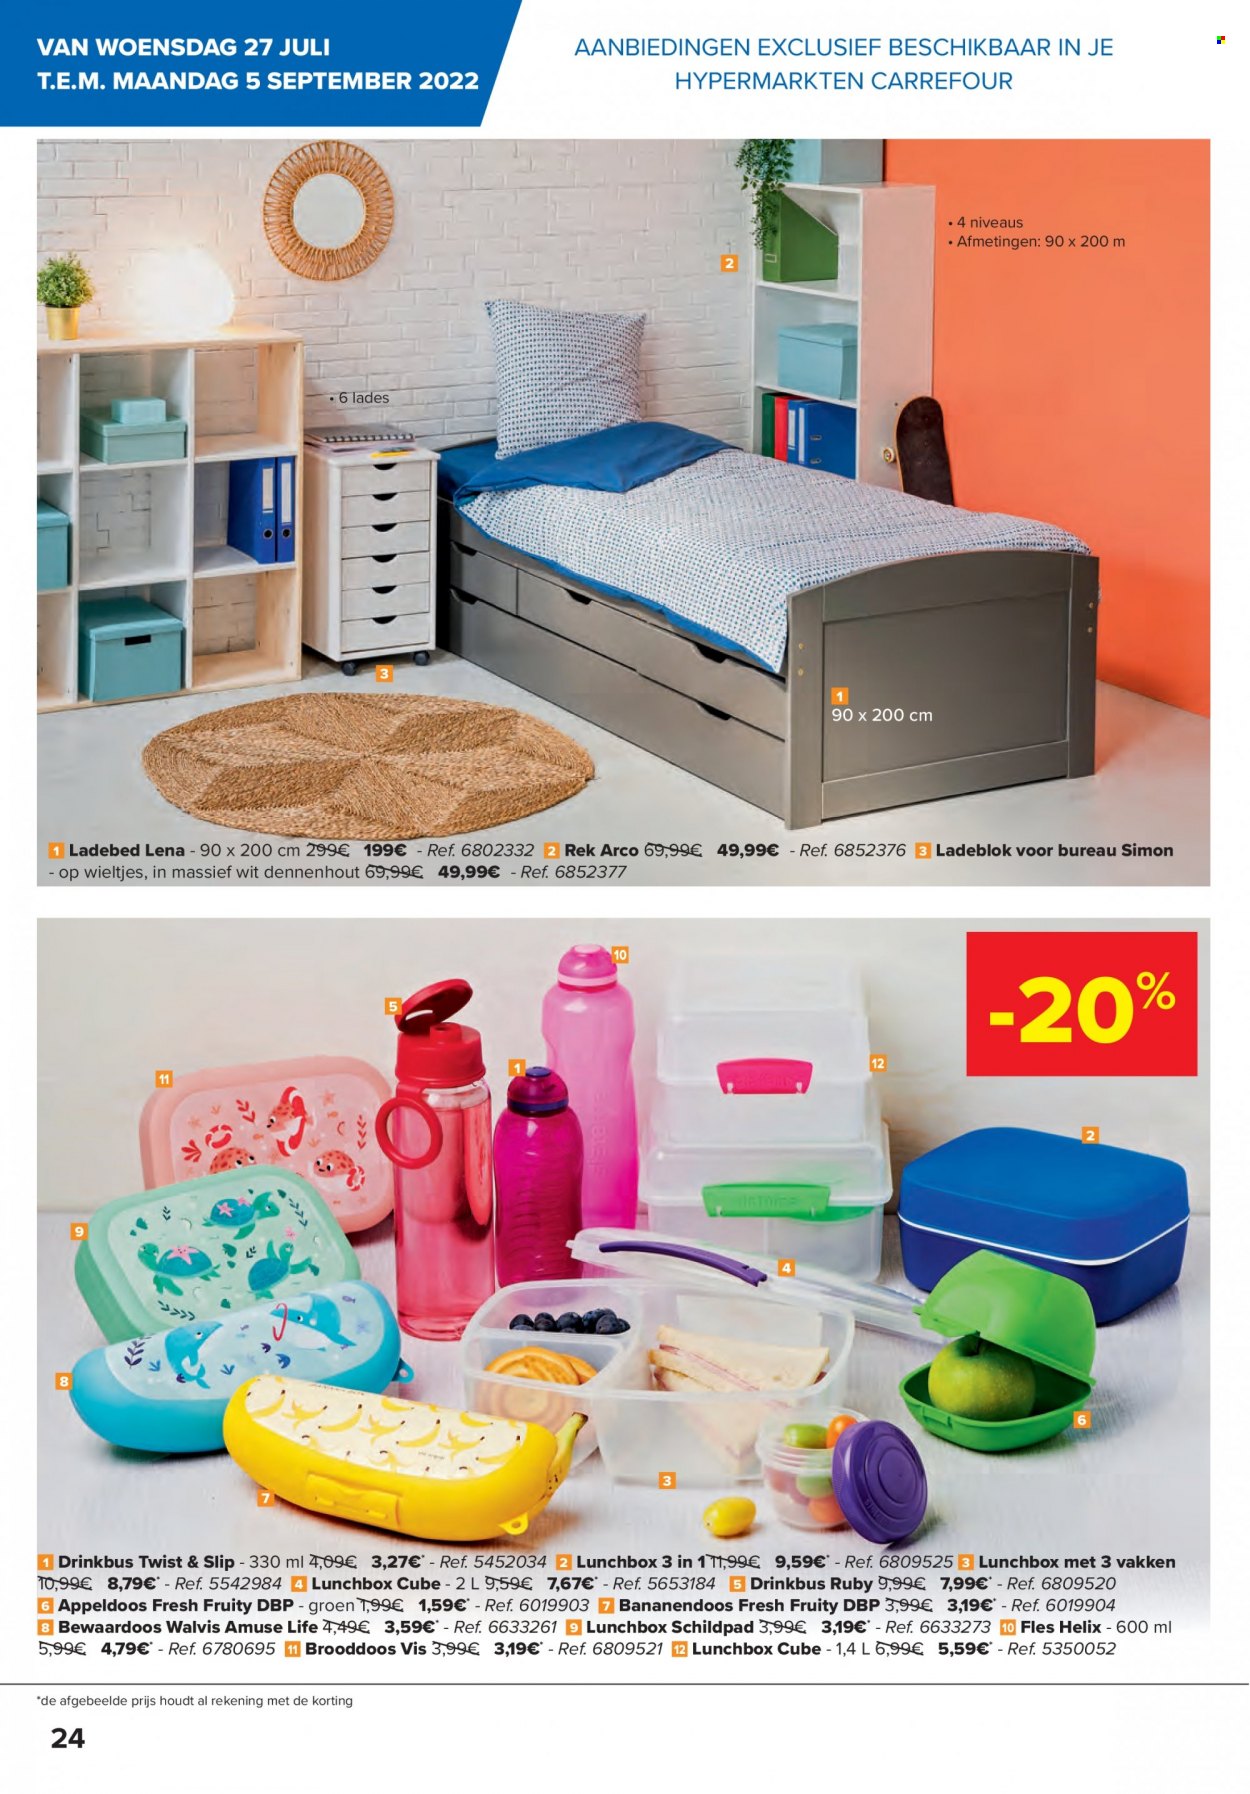 Catalogue Carrefour hypermarkt - 27.7.2022 - 5.9.2022. Page 24.